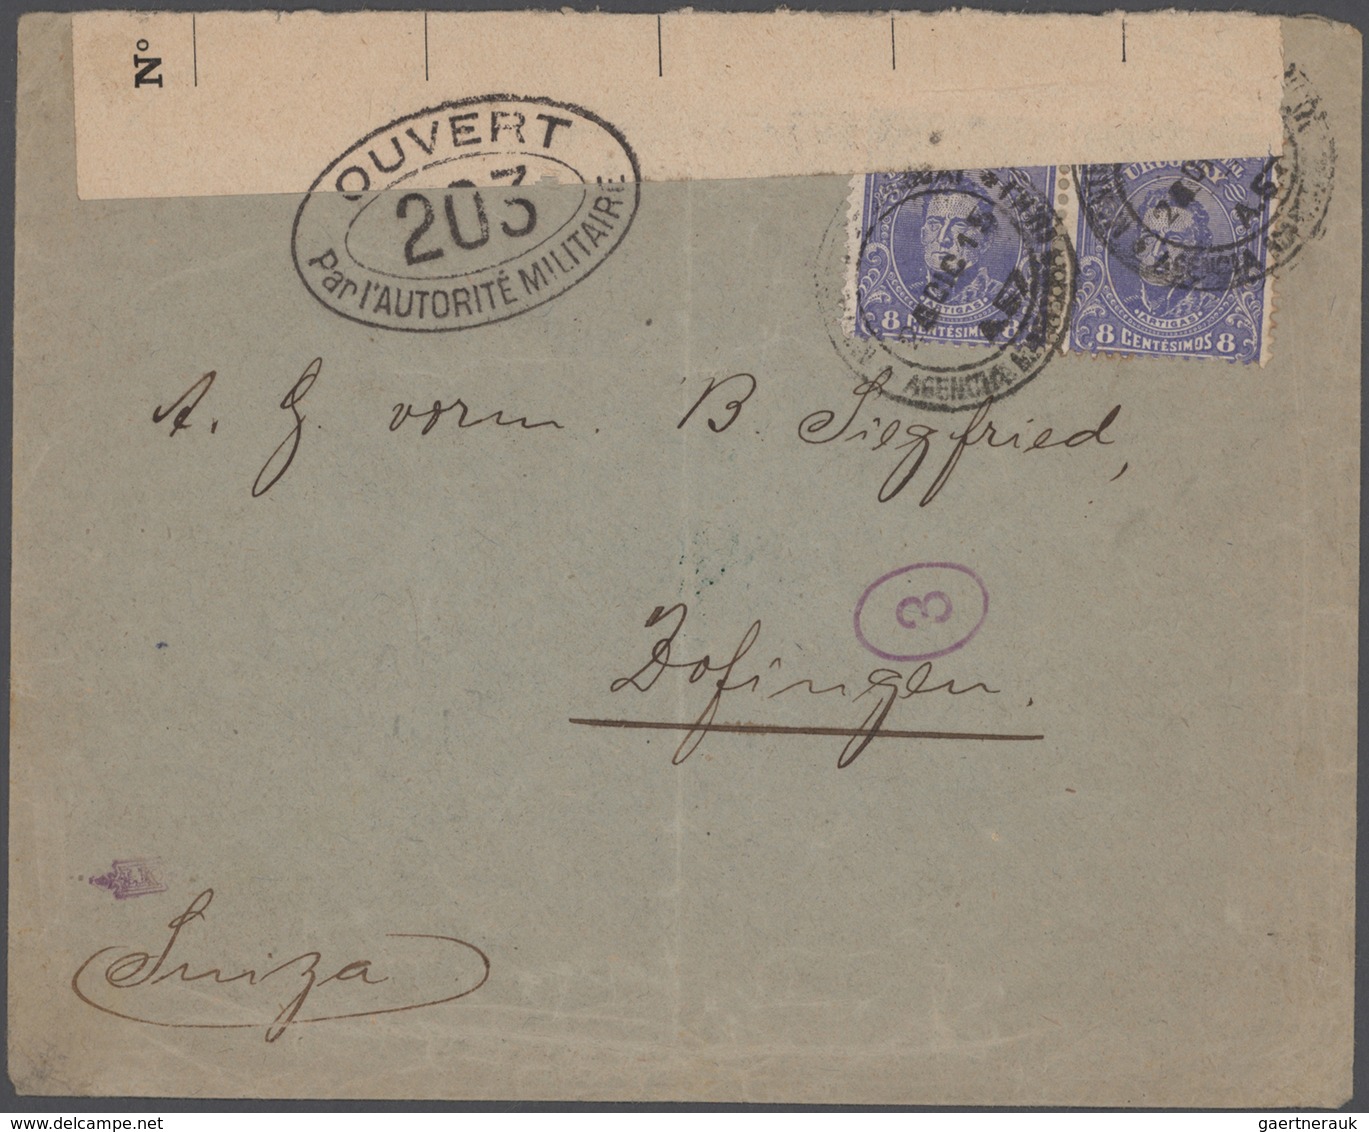 Uruguay: 1880/1957 (ca.), covers (26) and mostly used stationery (6), to be inspected. (ex Weserland